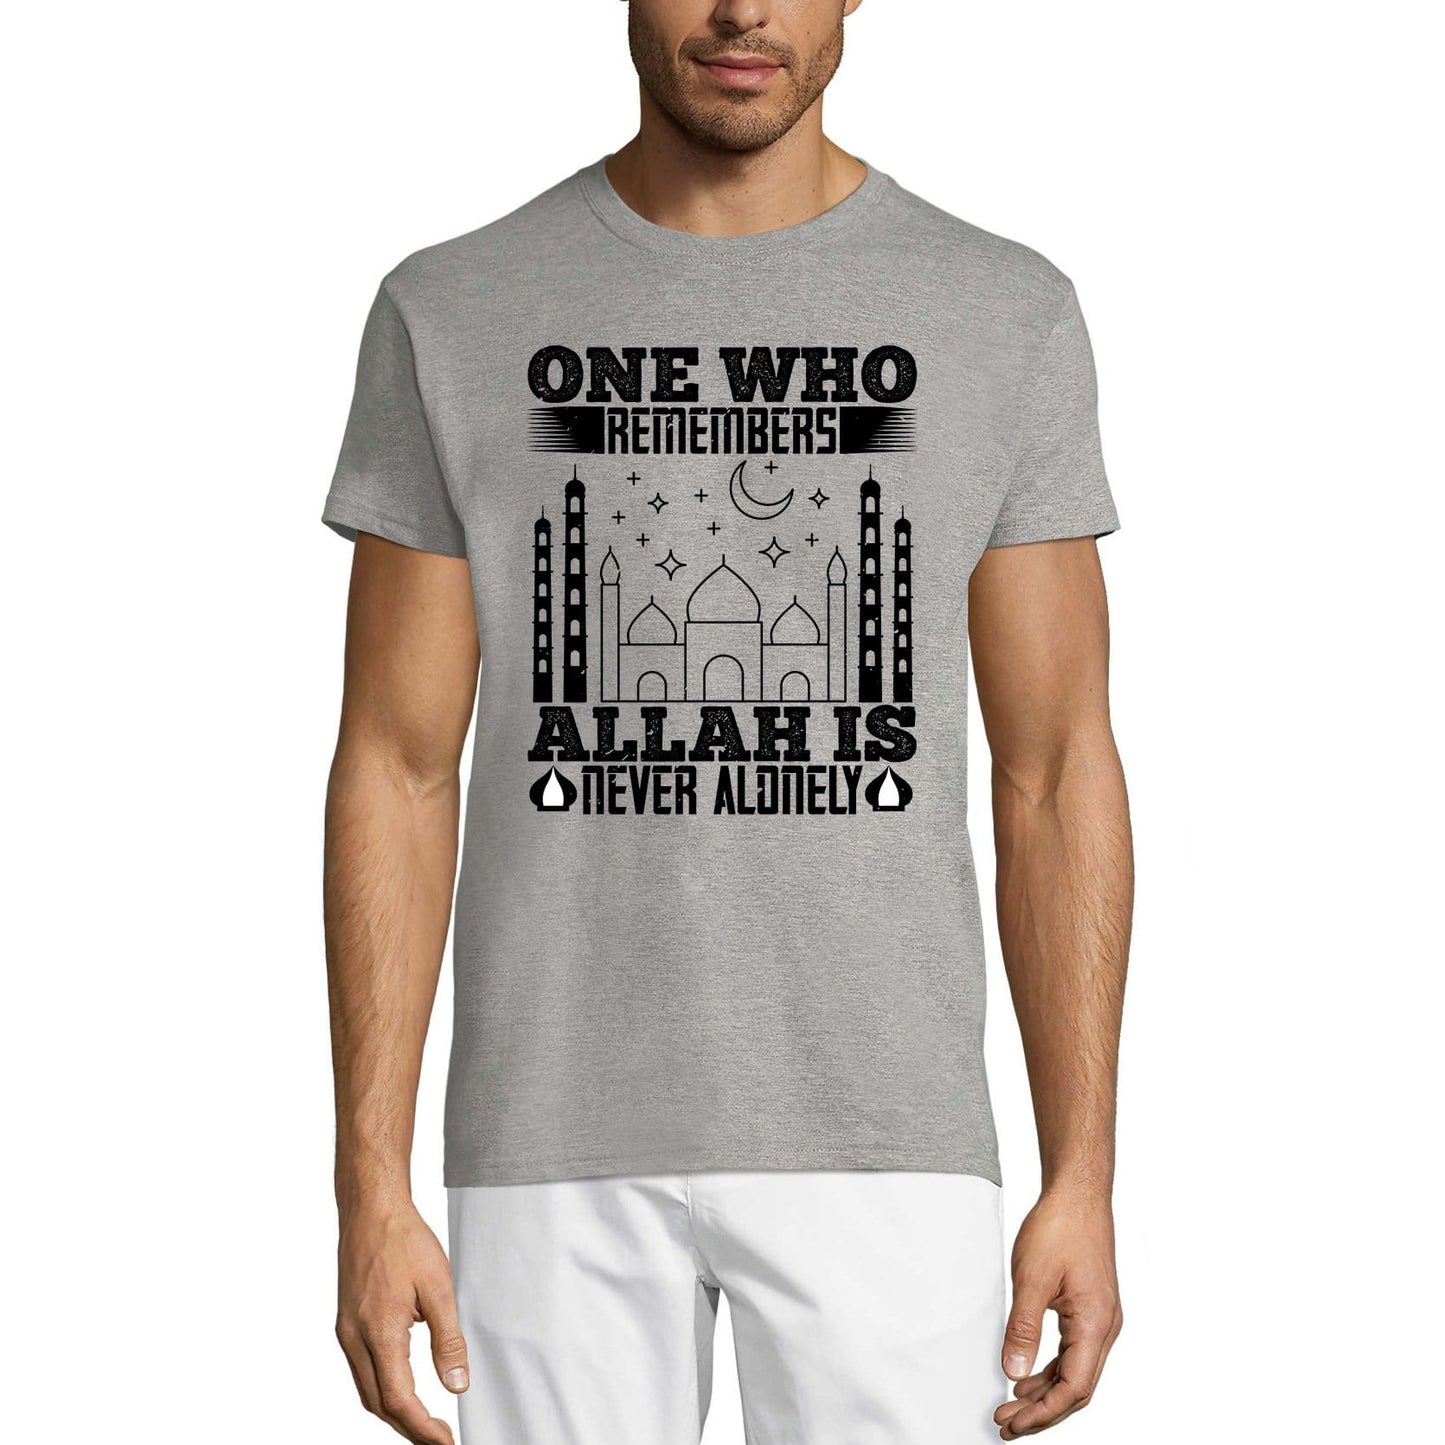 ULTRABASIC Men's T-Shirt One Who Remembers - Allah is Never Alonely - Mosque Tee Shirt